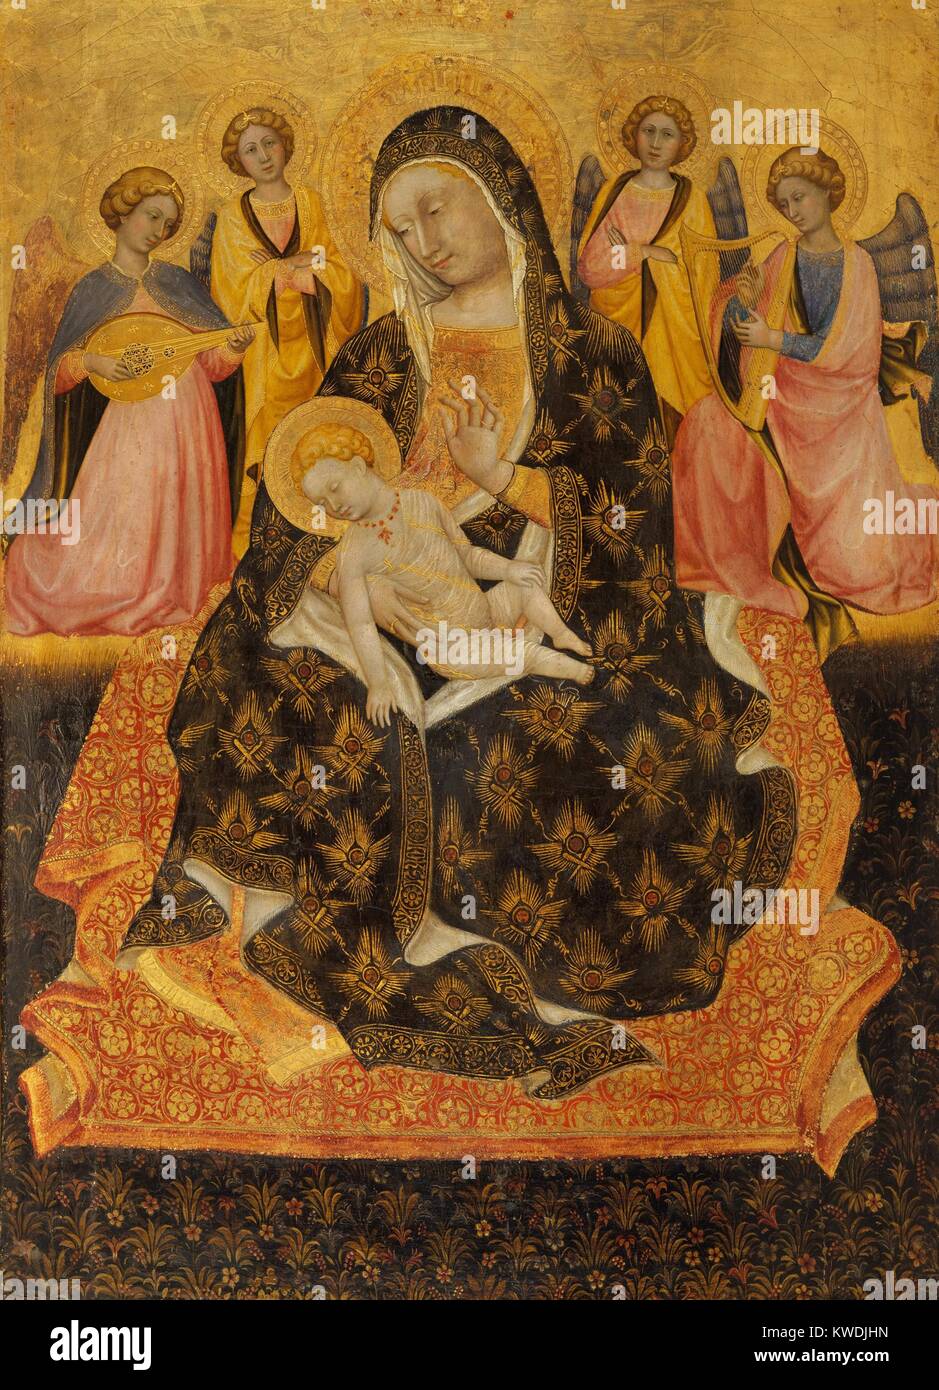 MADONNA AND CHILD WITH ANGELS, by Pietro di Domenico da Montepulciano, 1420, Italian Renaissance painting. This stylistically conservative work employs flat medieval decorative elements. The Madonna is depicted as the Queen of Heaven, who sits on the ground, as angels in the background playing musical instruments (BSLOC 2017 16 35) Stock Photo